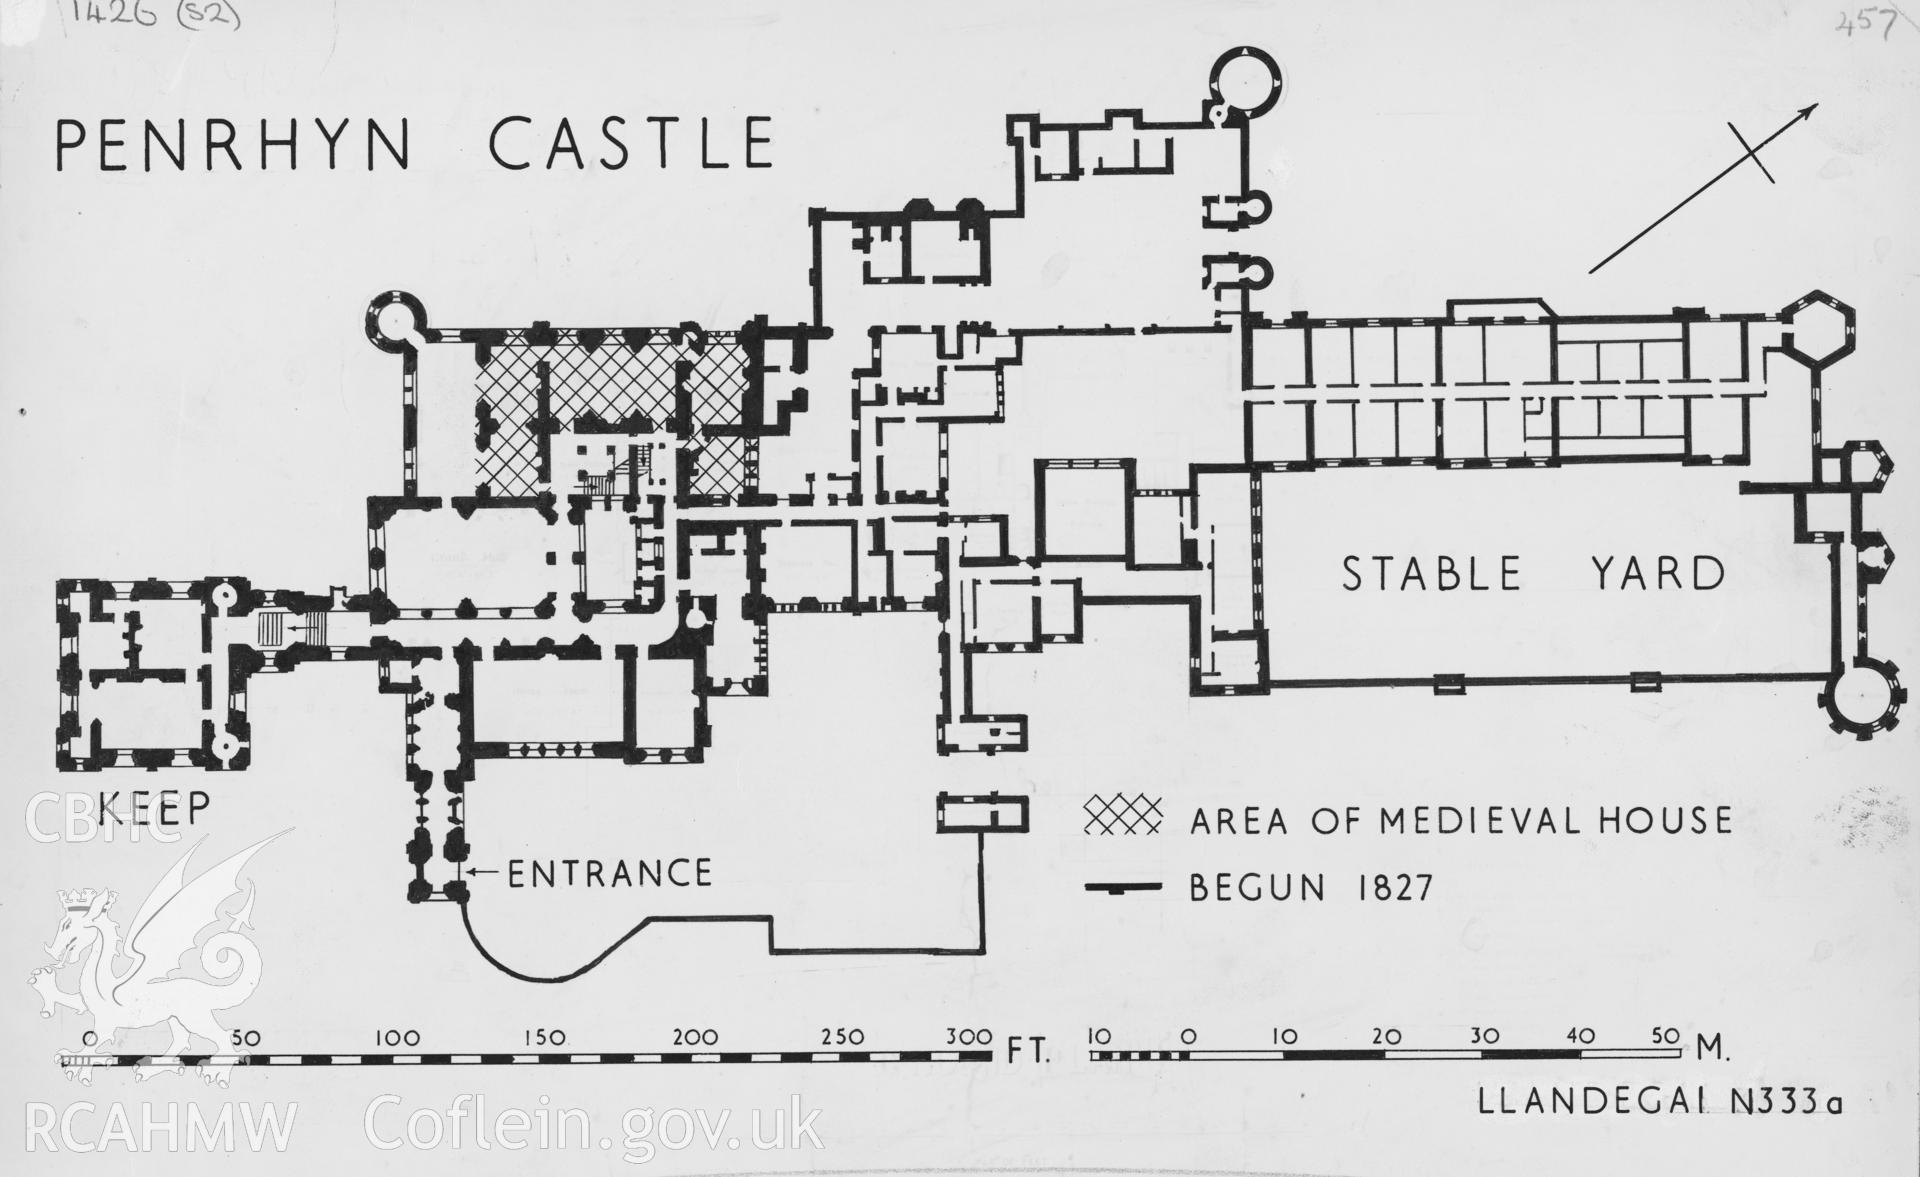 Digital copy of RCAHMW drawing (ink on linen) showing plan of Penrhyn Castle, Llandegai, as published in Caerns Inventory Vol III, fig 122.